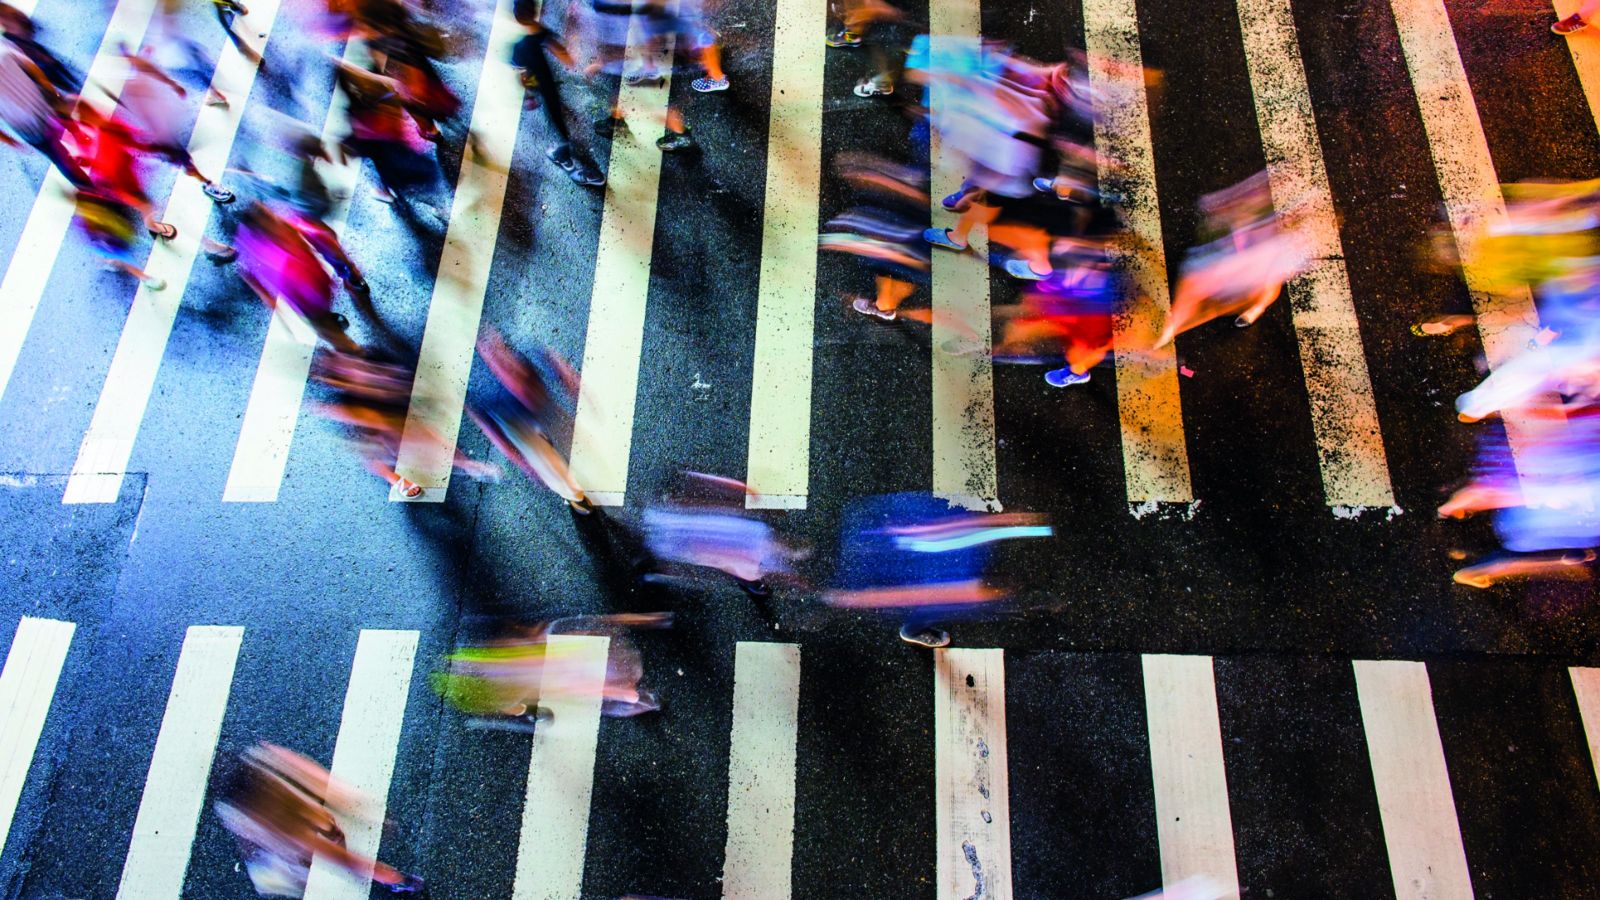 Birds eye view of several blurred people crossing both ways on a zebra crossing.